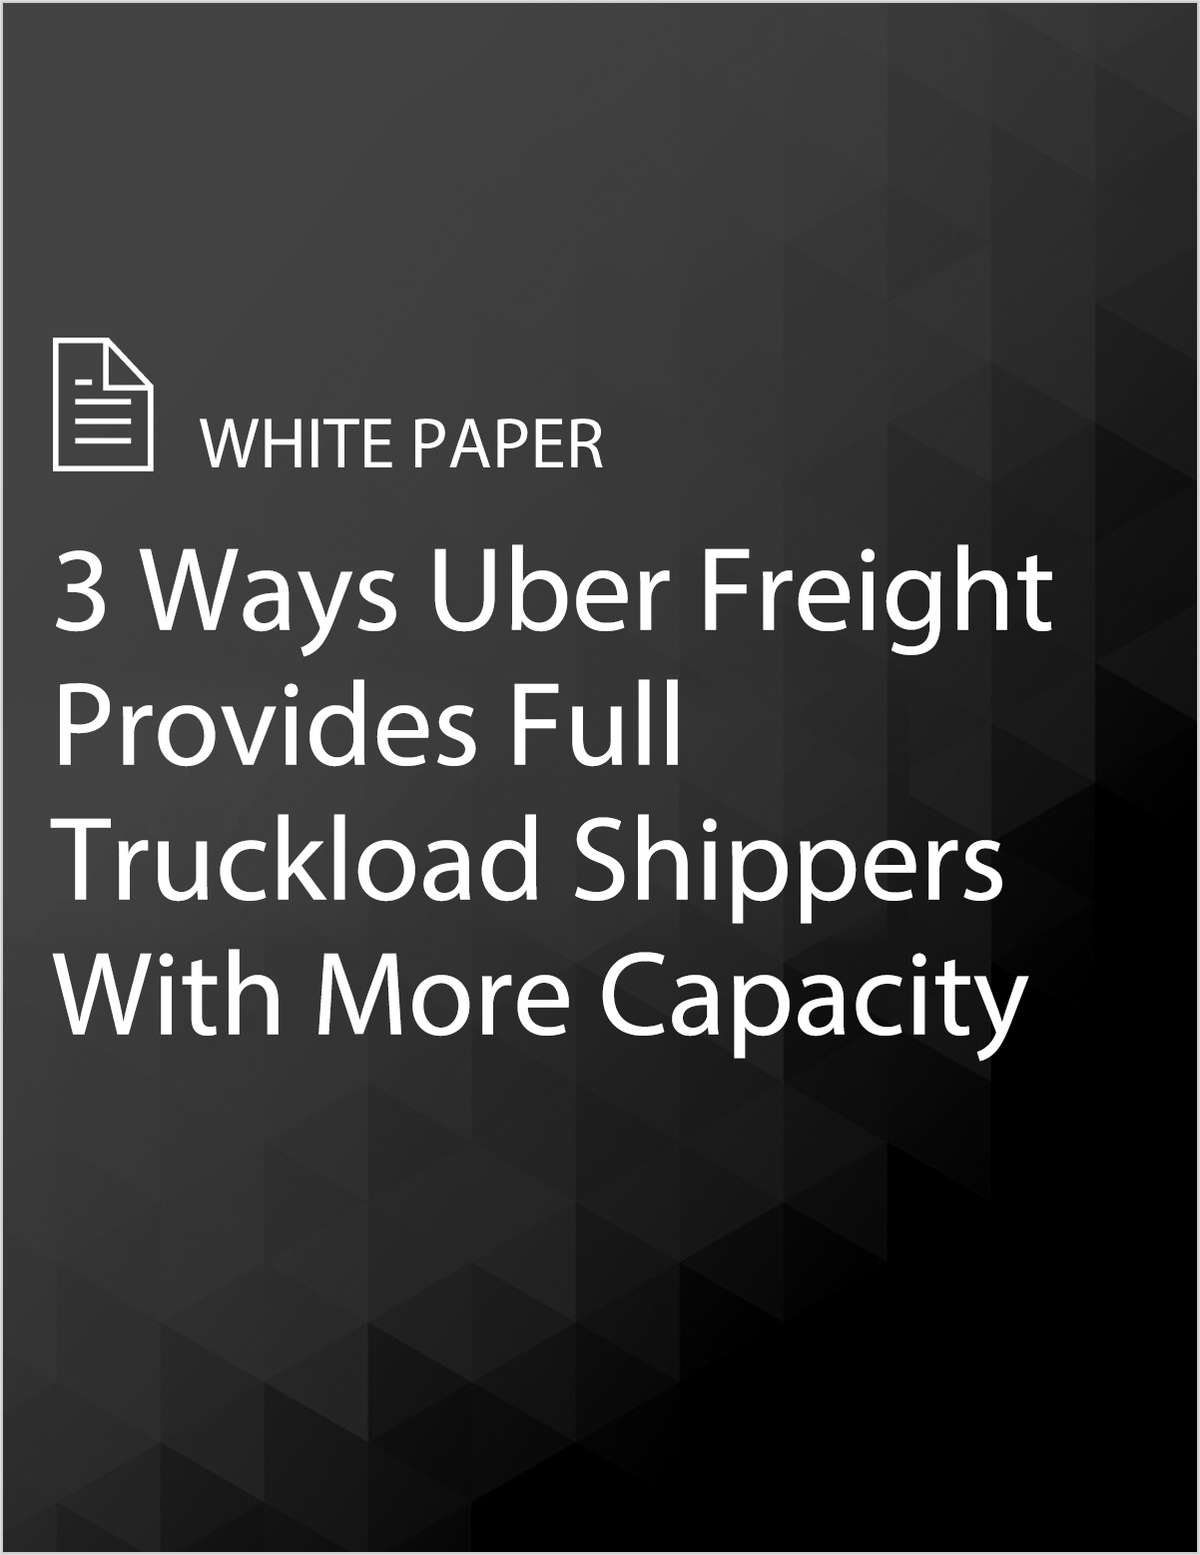 3 Ways Uber Freight Provides Full Truckload Shippers With More Capacity